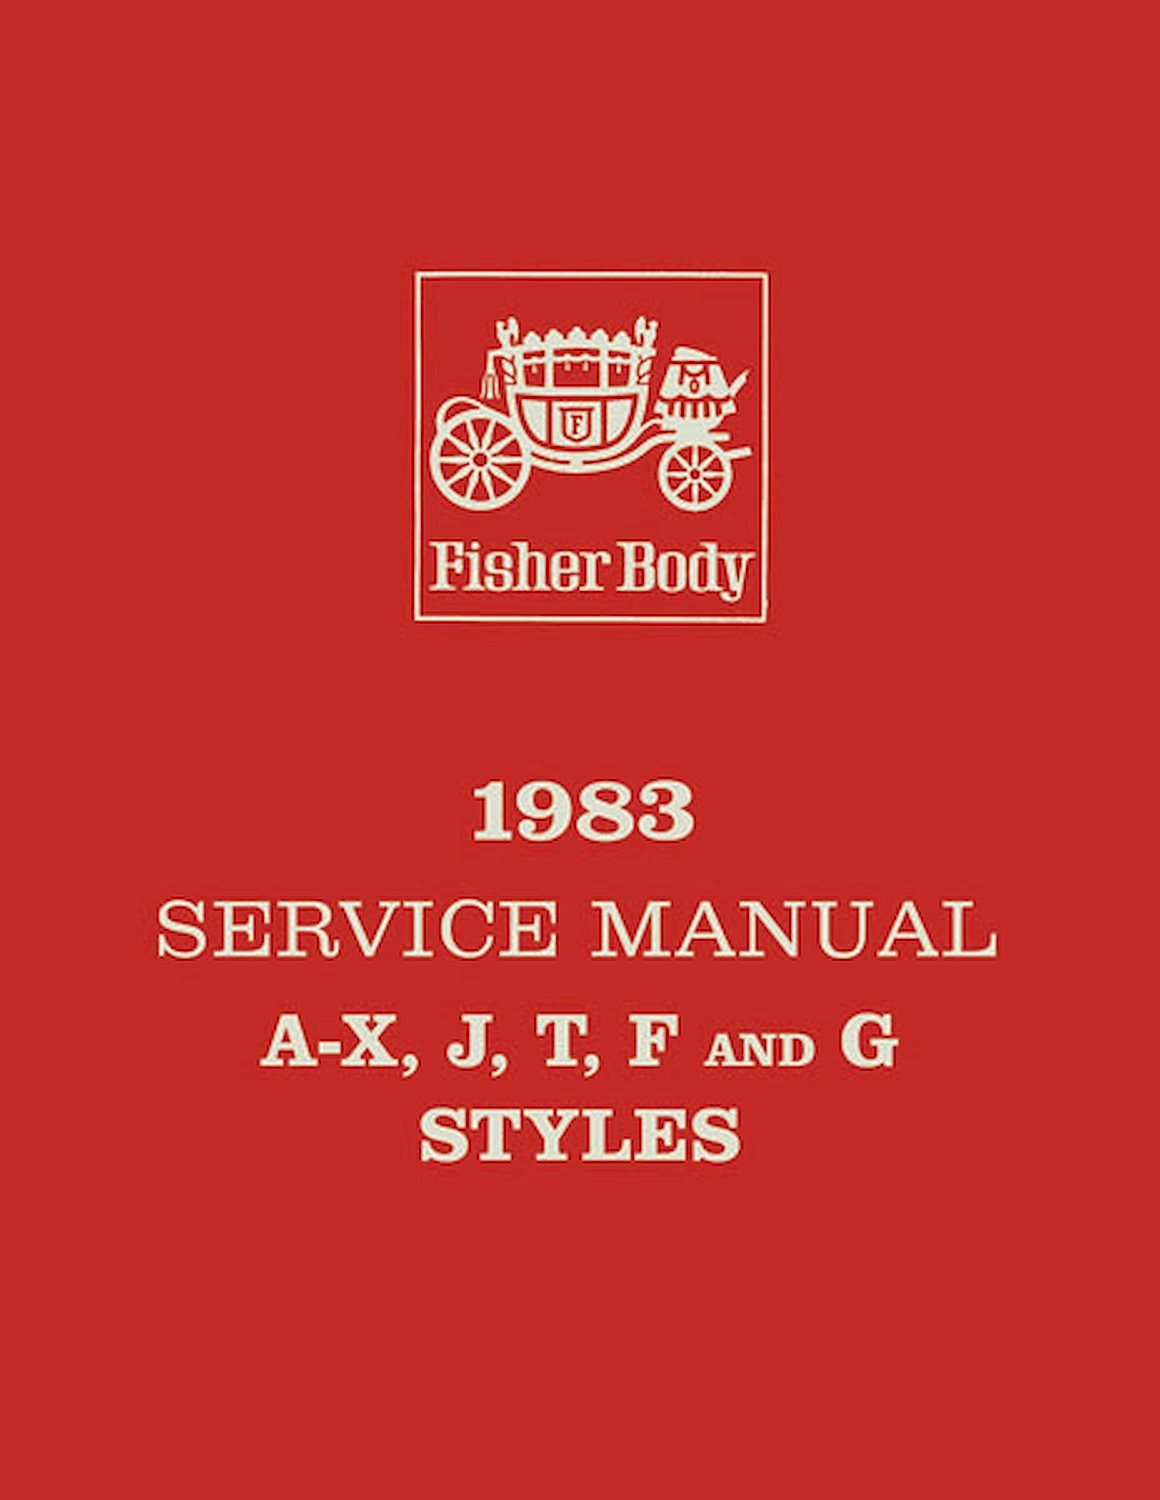 Fisher Body Service Manual for 1983 Buick, Cadillac, Chevrolet, Oldsmobile and Pontiac Models, A-F-G-J-T-X Body Styles